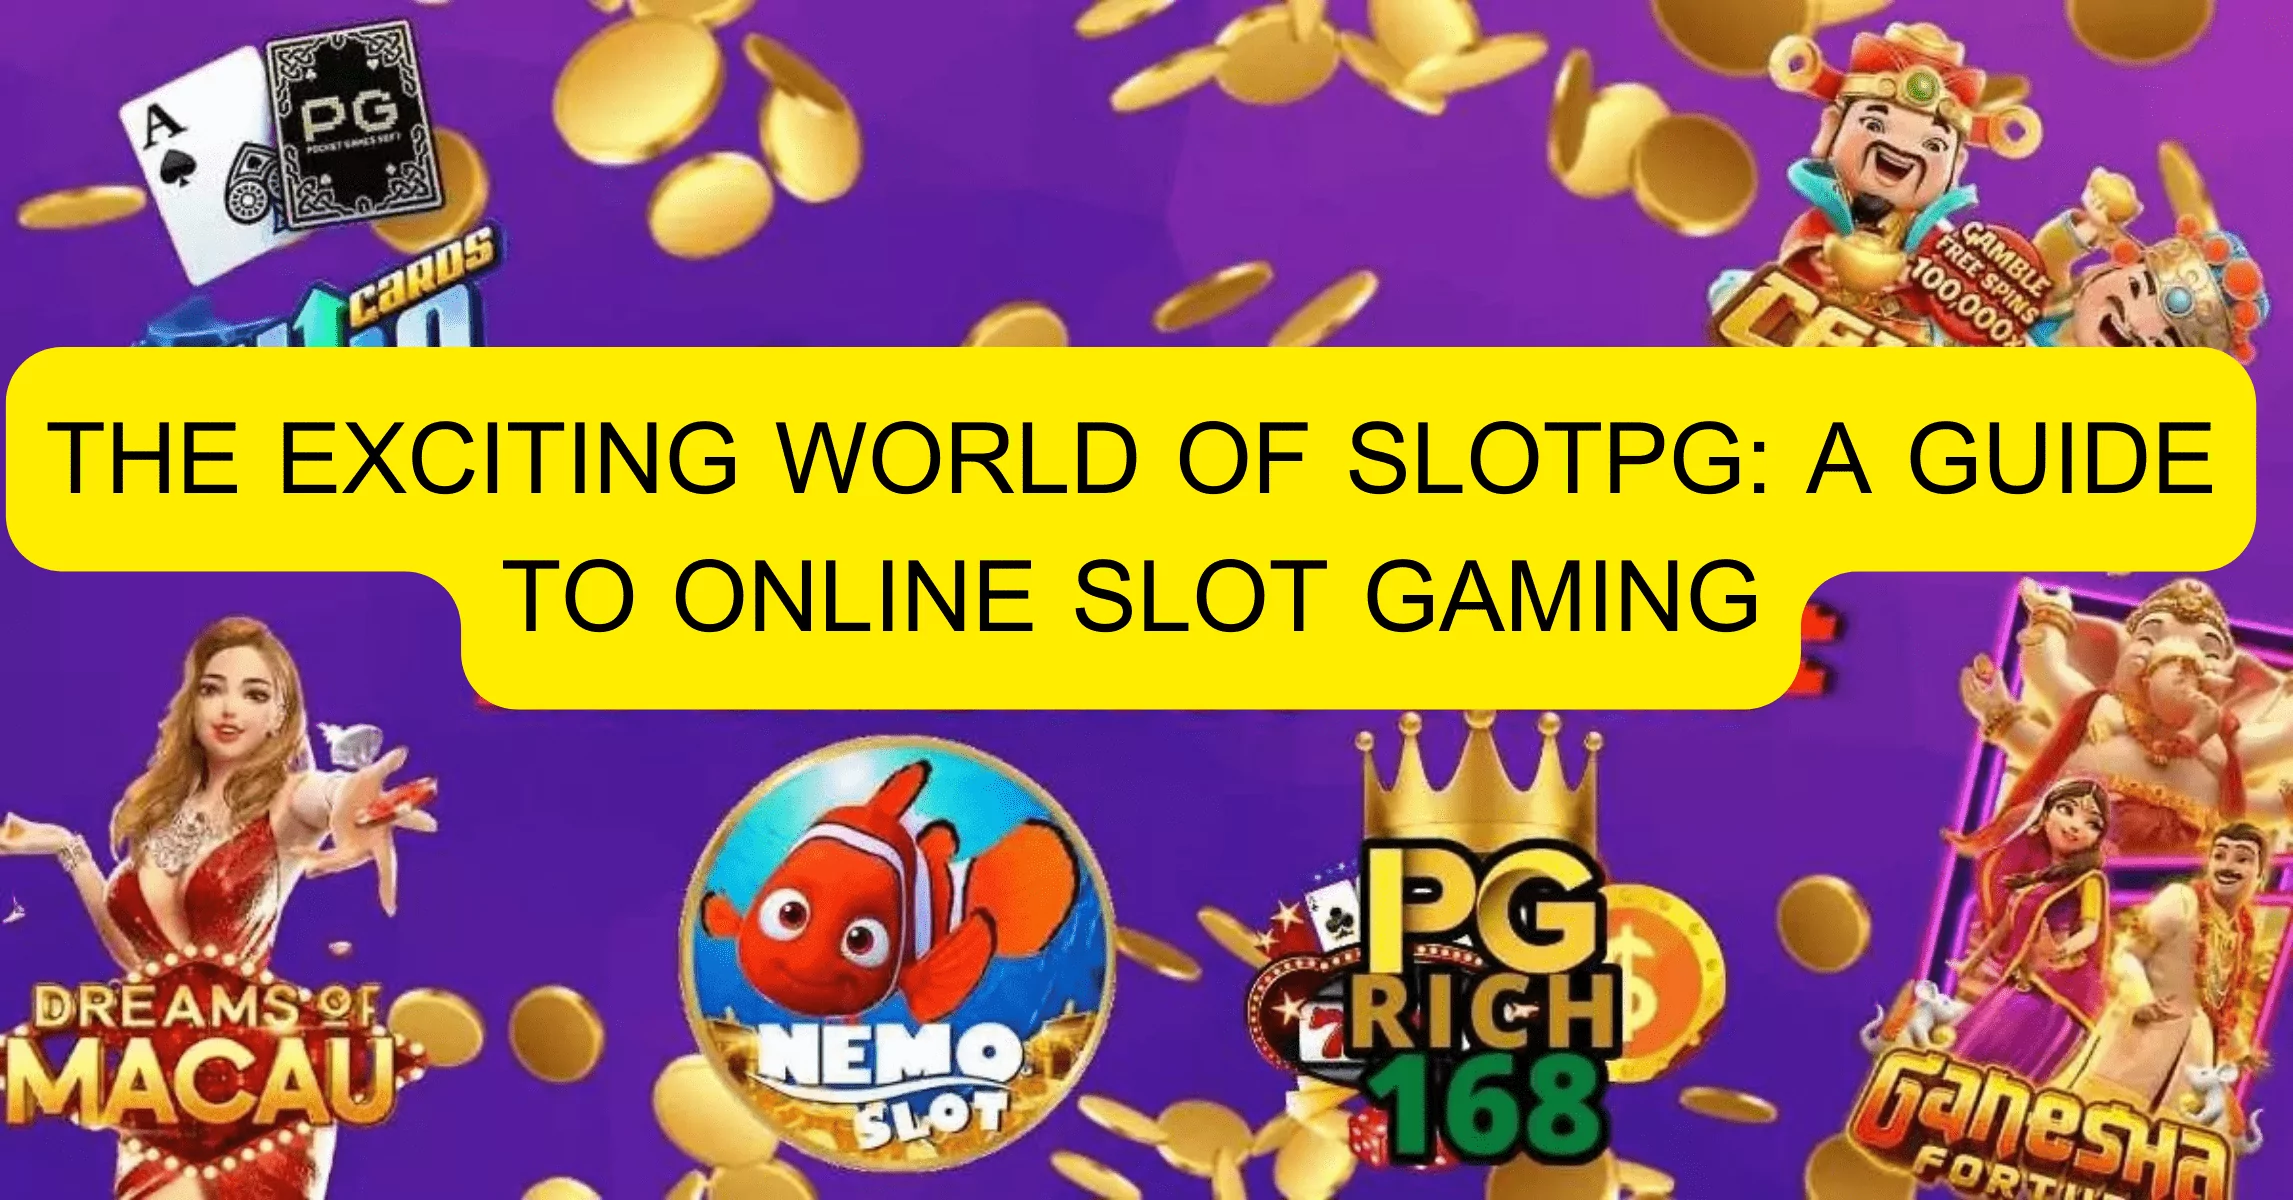 The Exciting World of Slotpg A Guide to Online Slot Gaming-pgrich168-slotpg